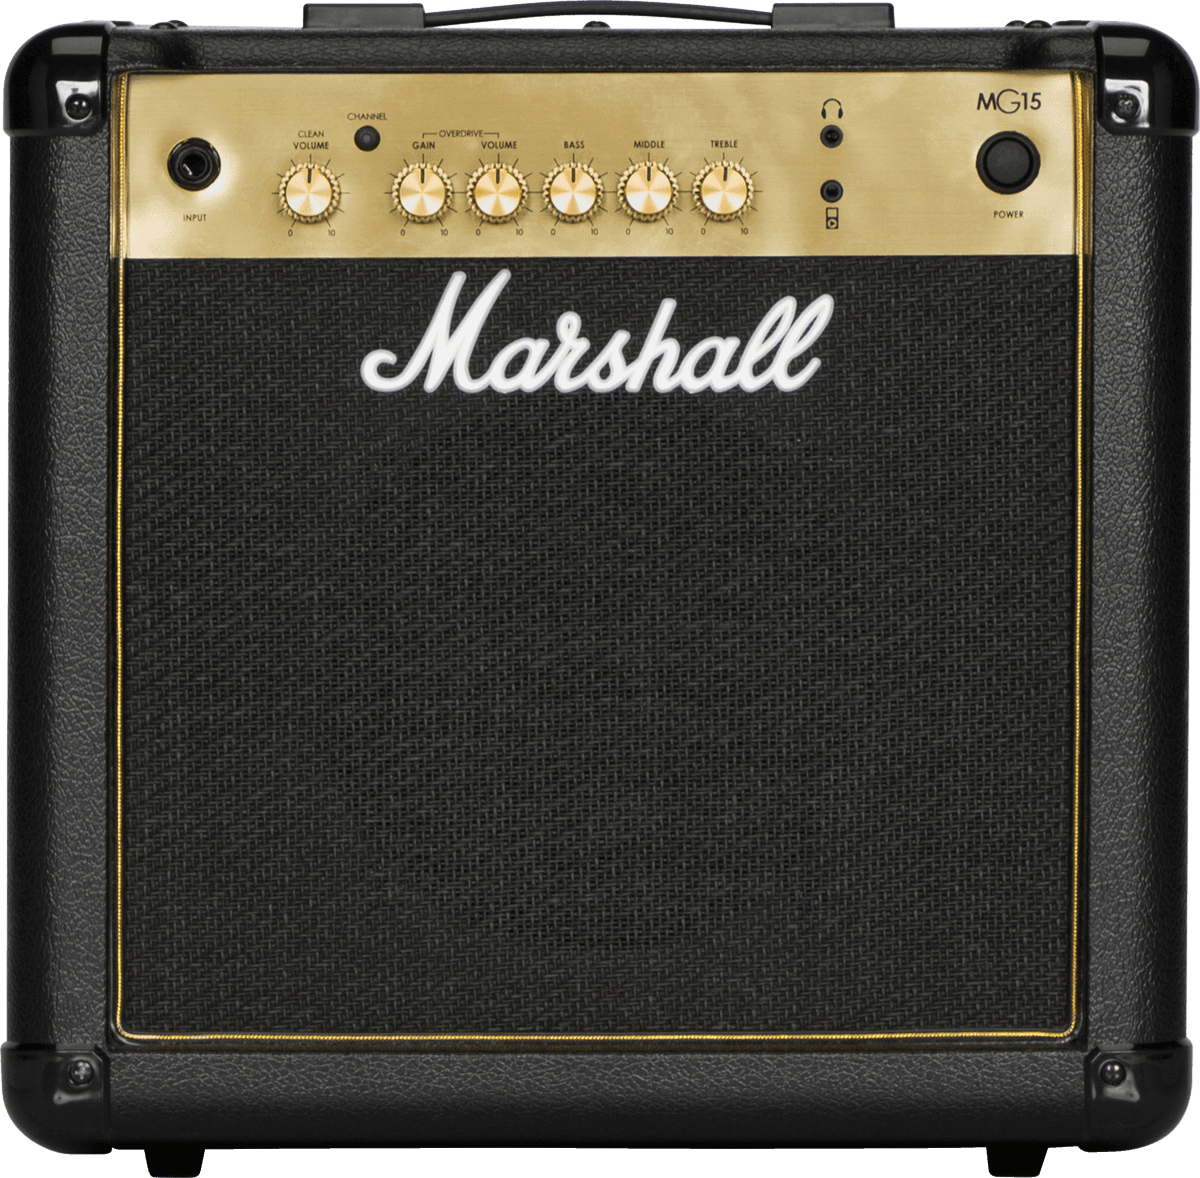 Marshall Mg15g 15w - Electric guitar combo amp - Variation 1